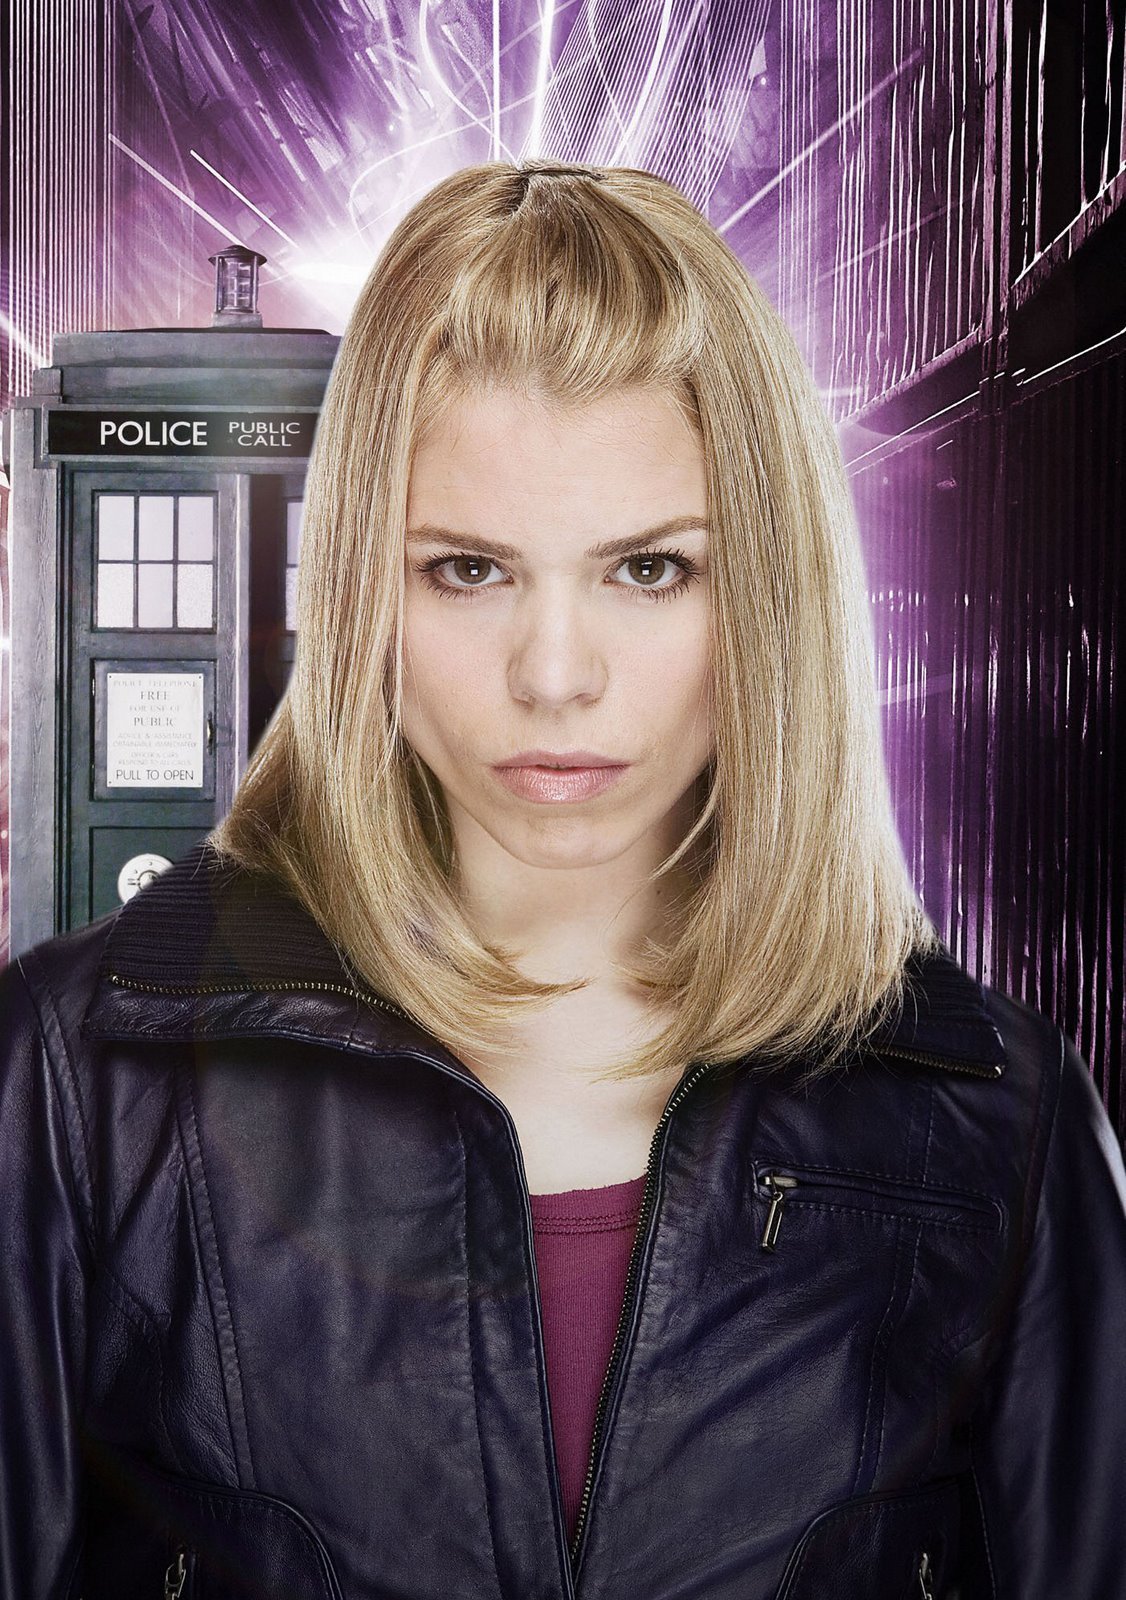 Pictures - Rose Tyler